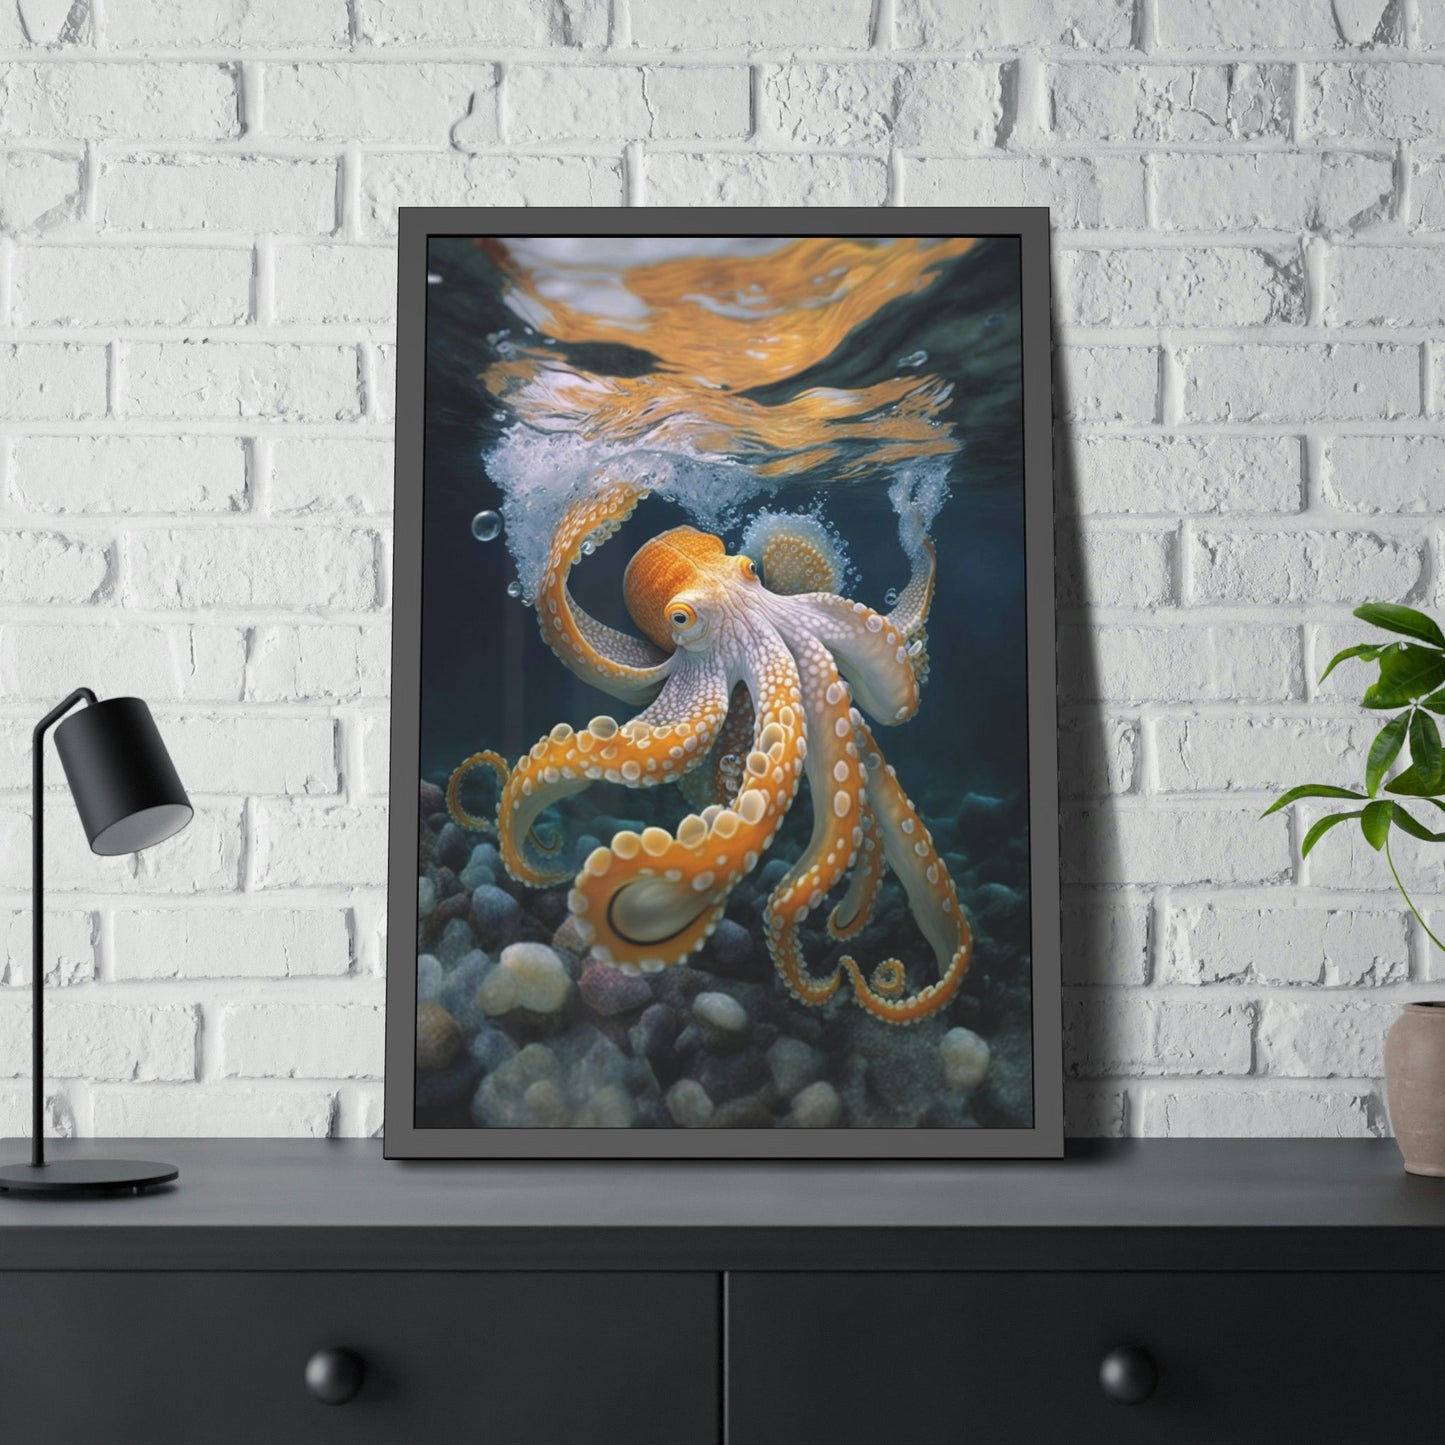 Octopus Wonderland: A Dreamy and Surreal Painting on Canvas